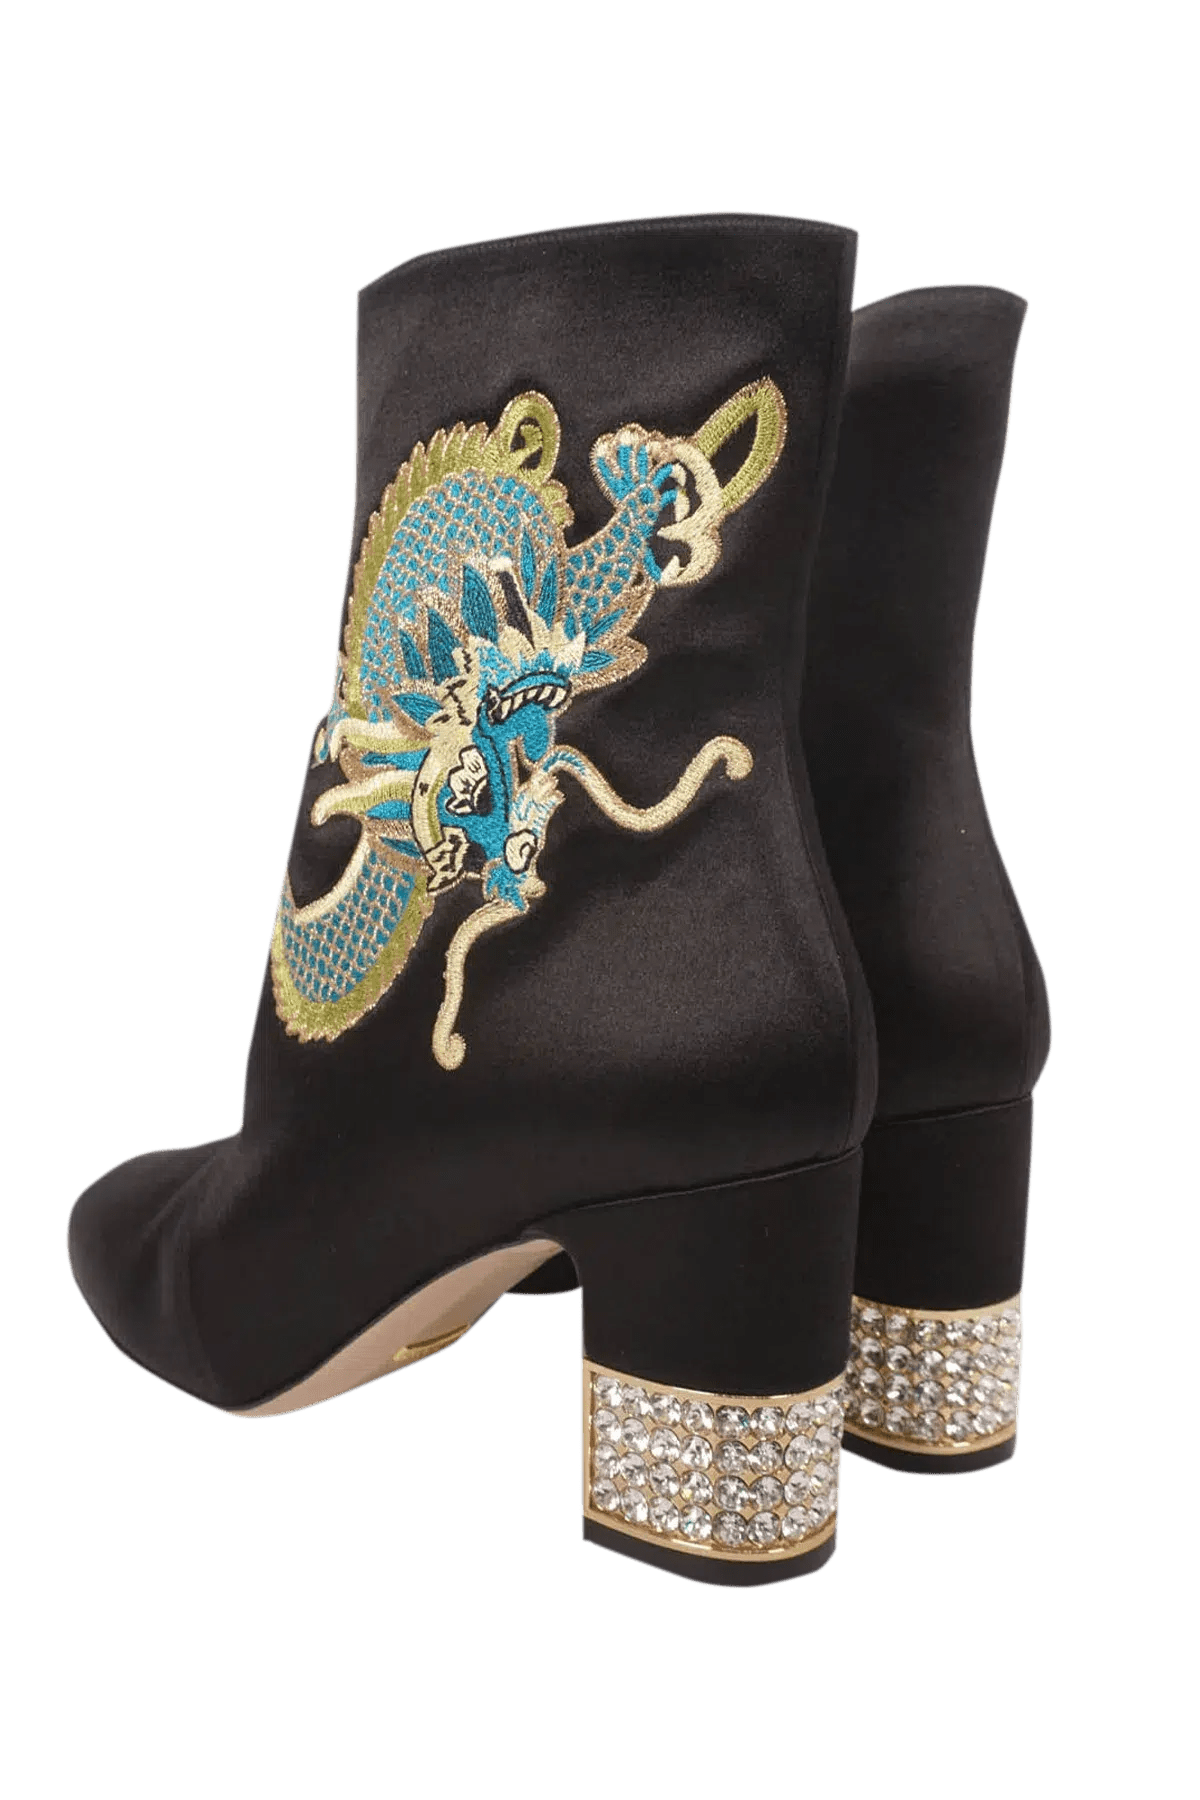 Gucci Size 39.5 Black Candy Dragon Embroidered Satin Ankle Boots - Foxy Couture Carmel